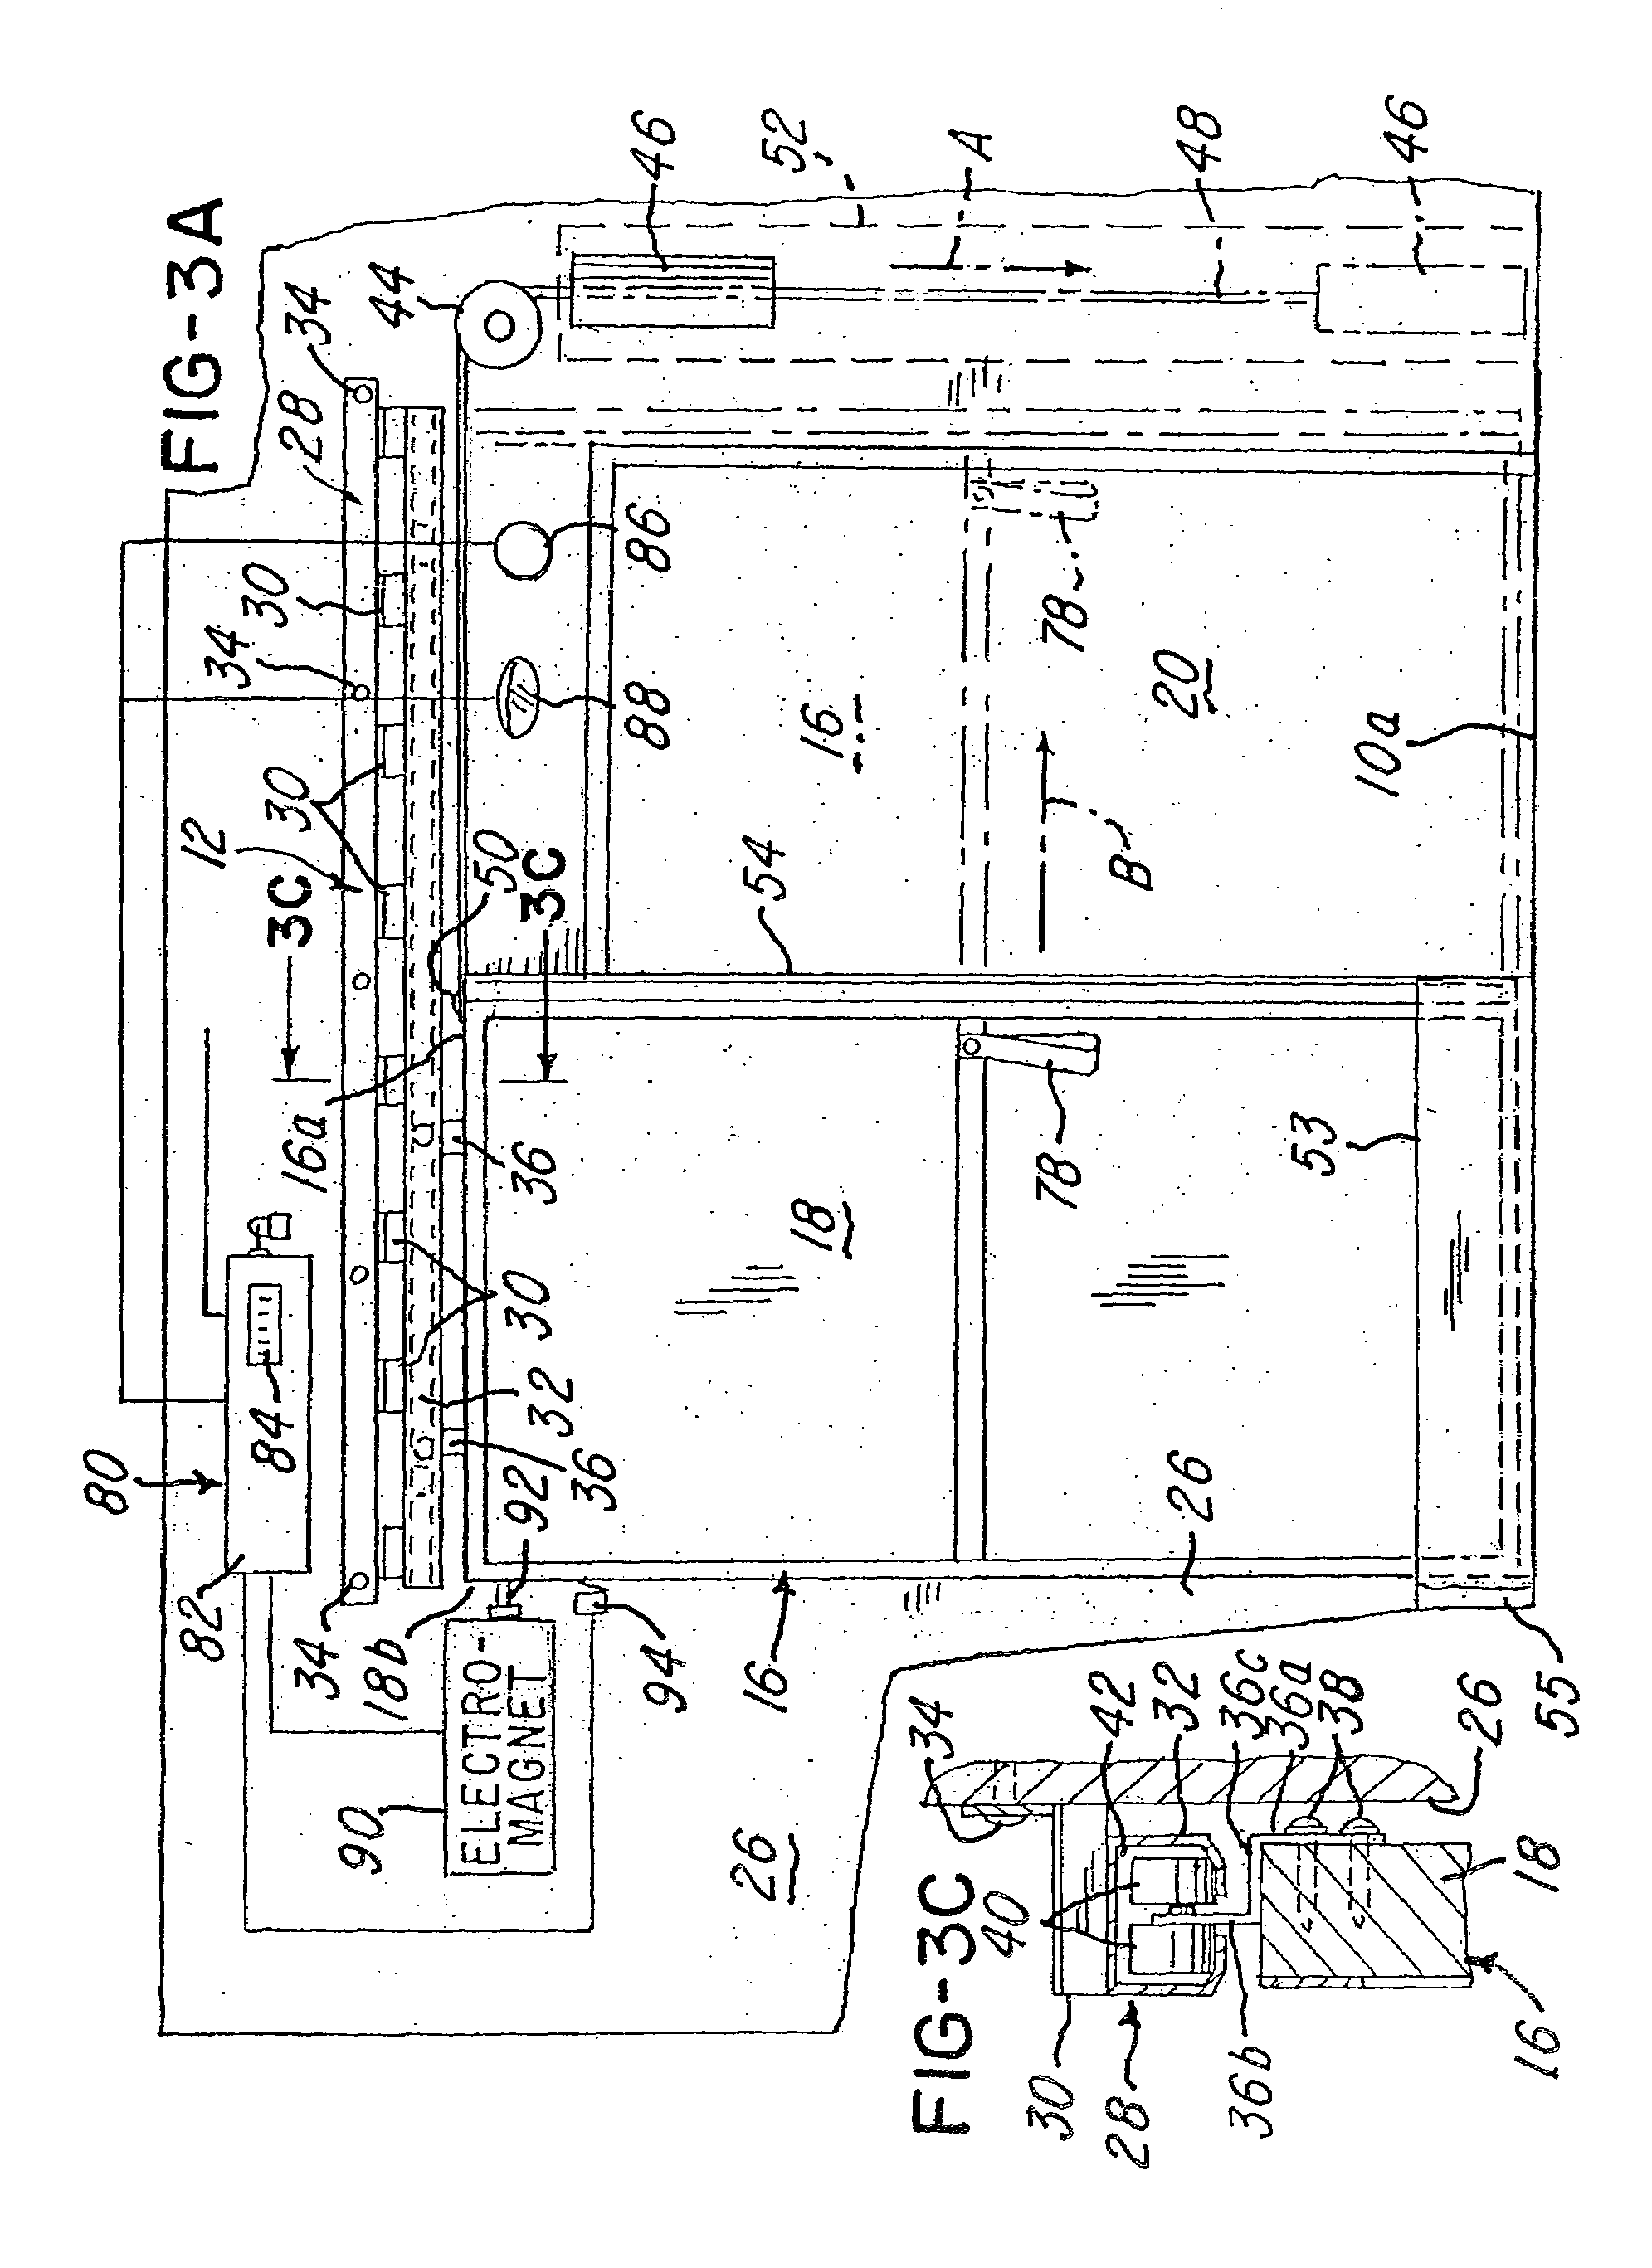 Secondary door and temperature control system and method